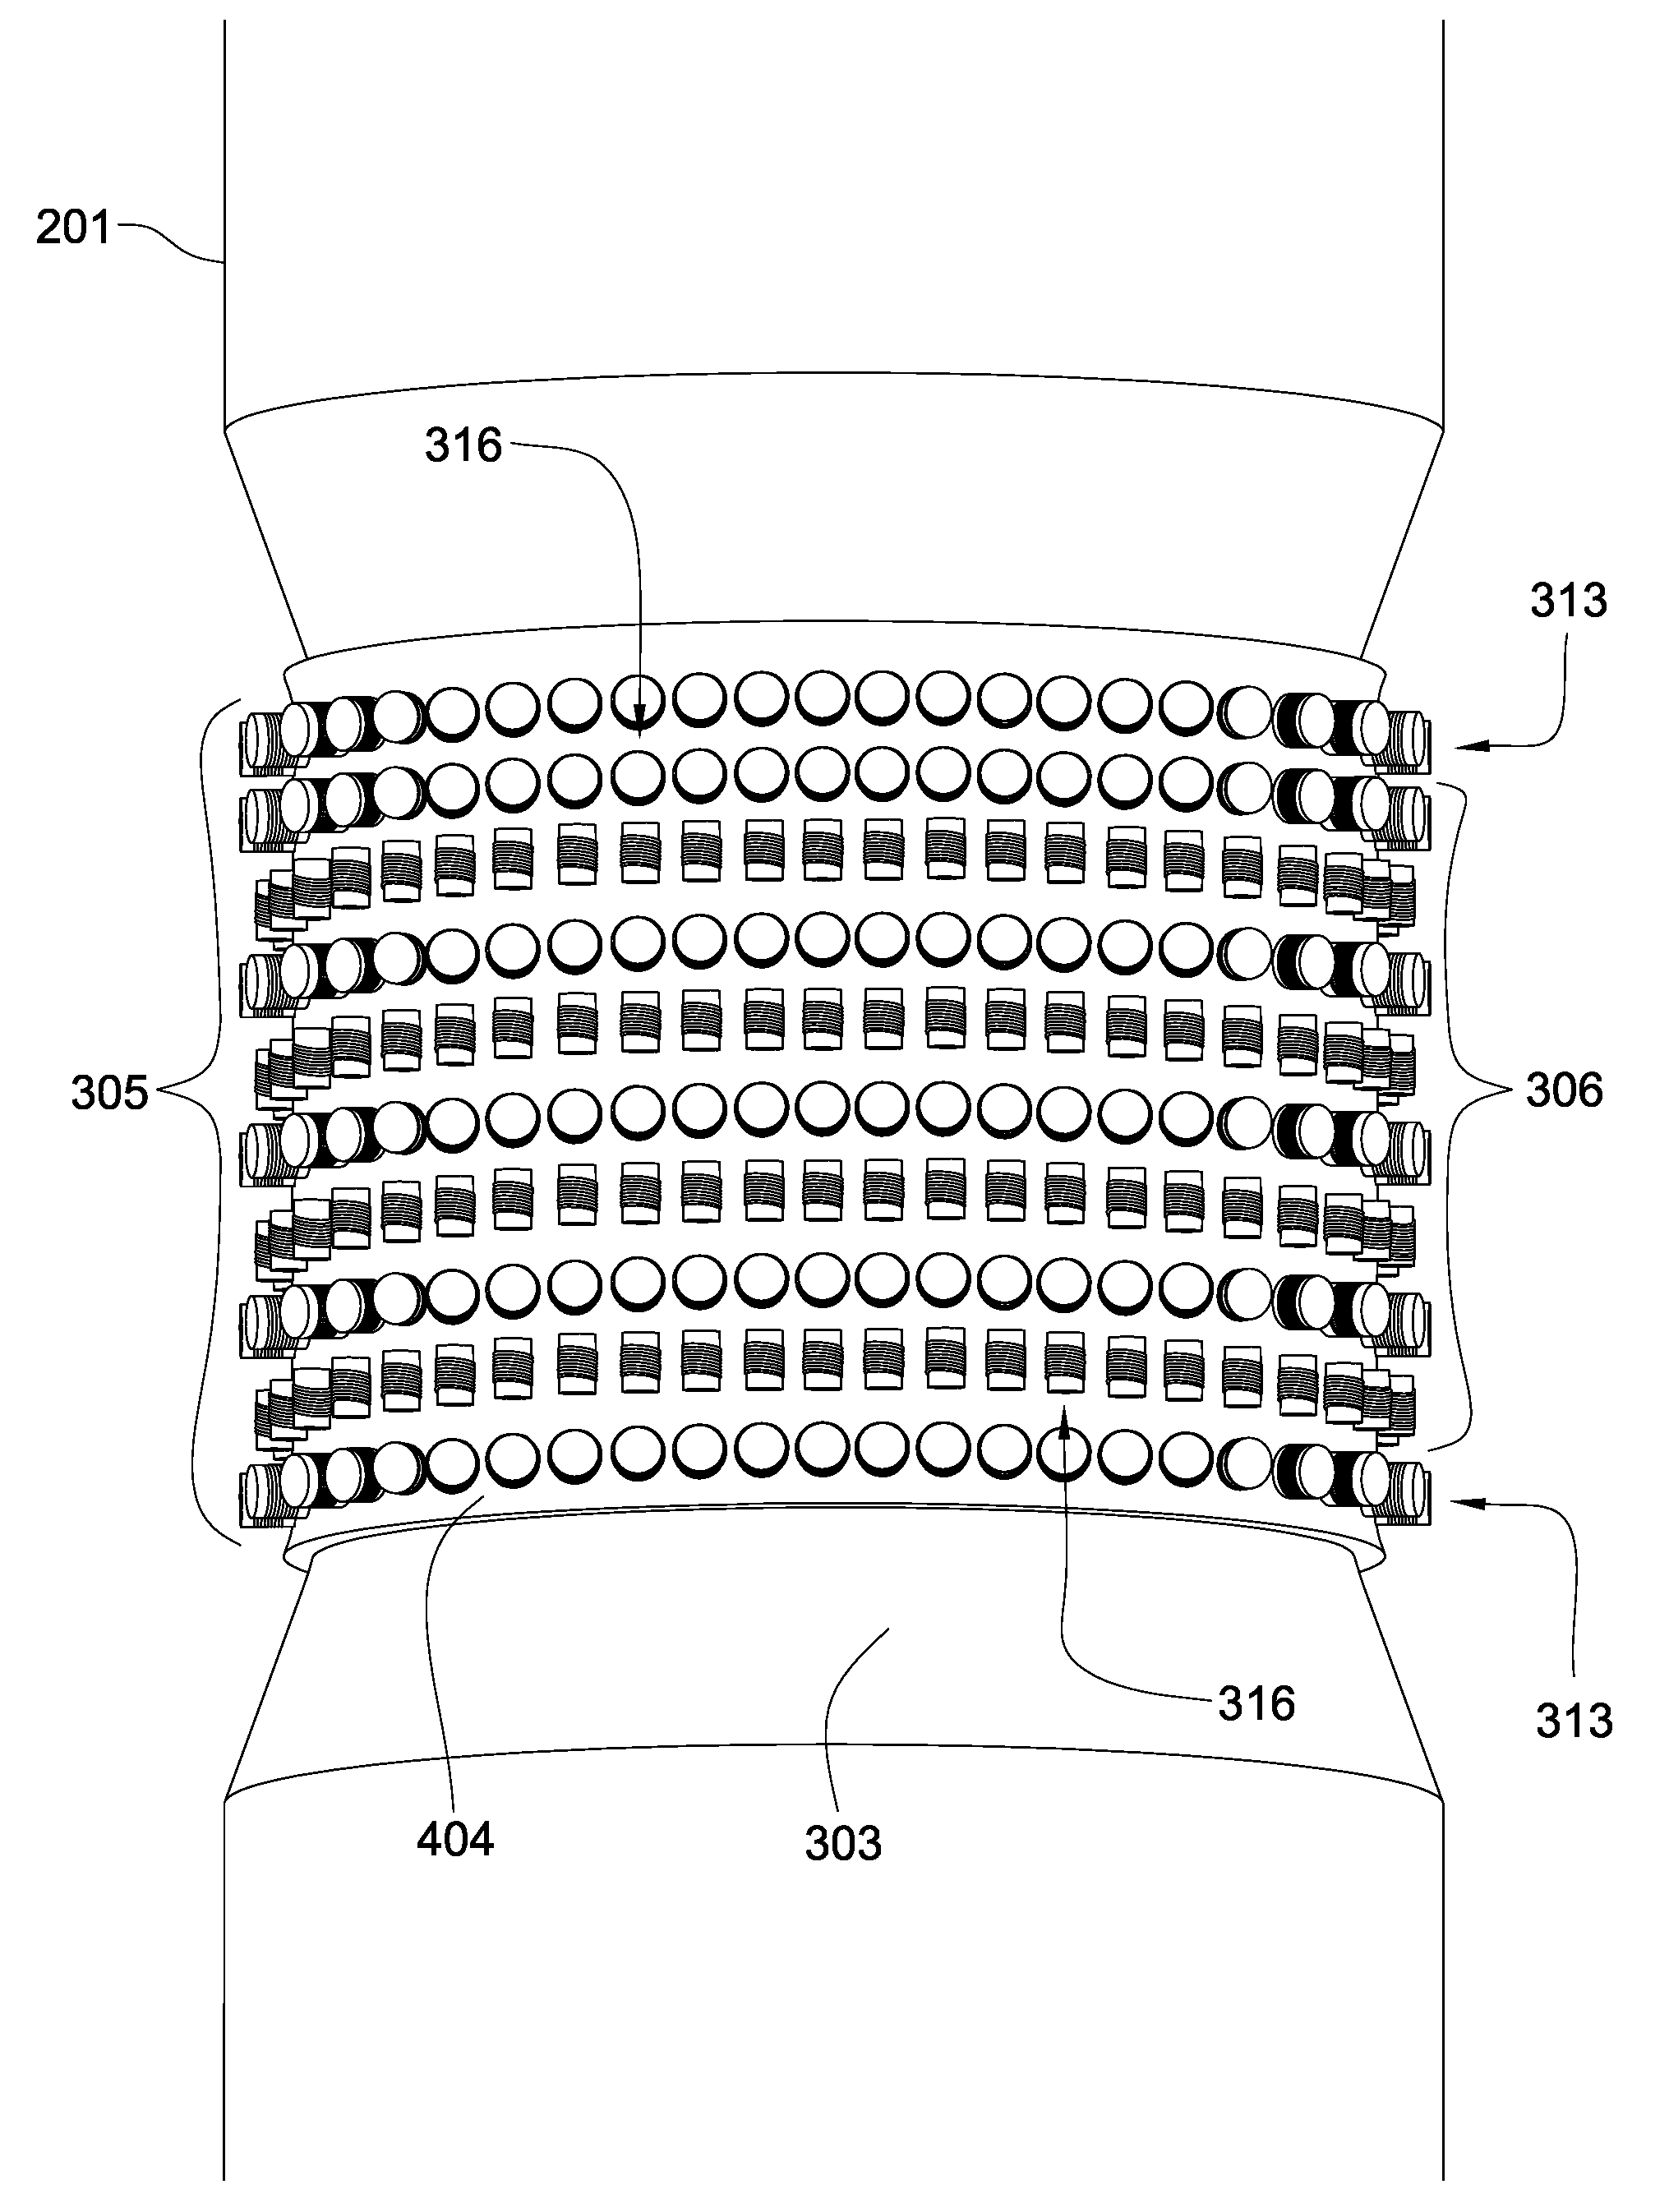 Externally Guided and Directed Halbach Array Field Induction Resistivity Tool